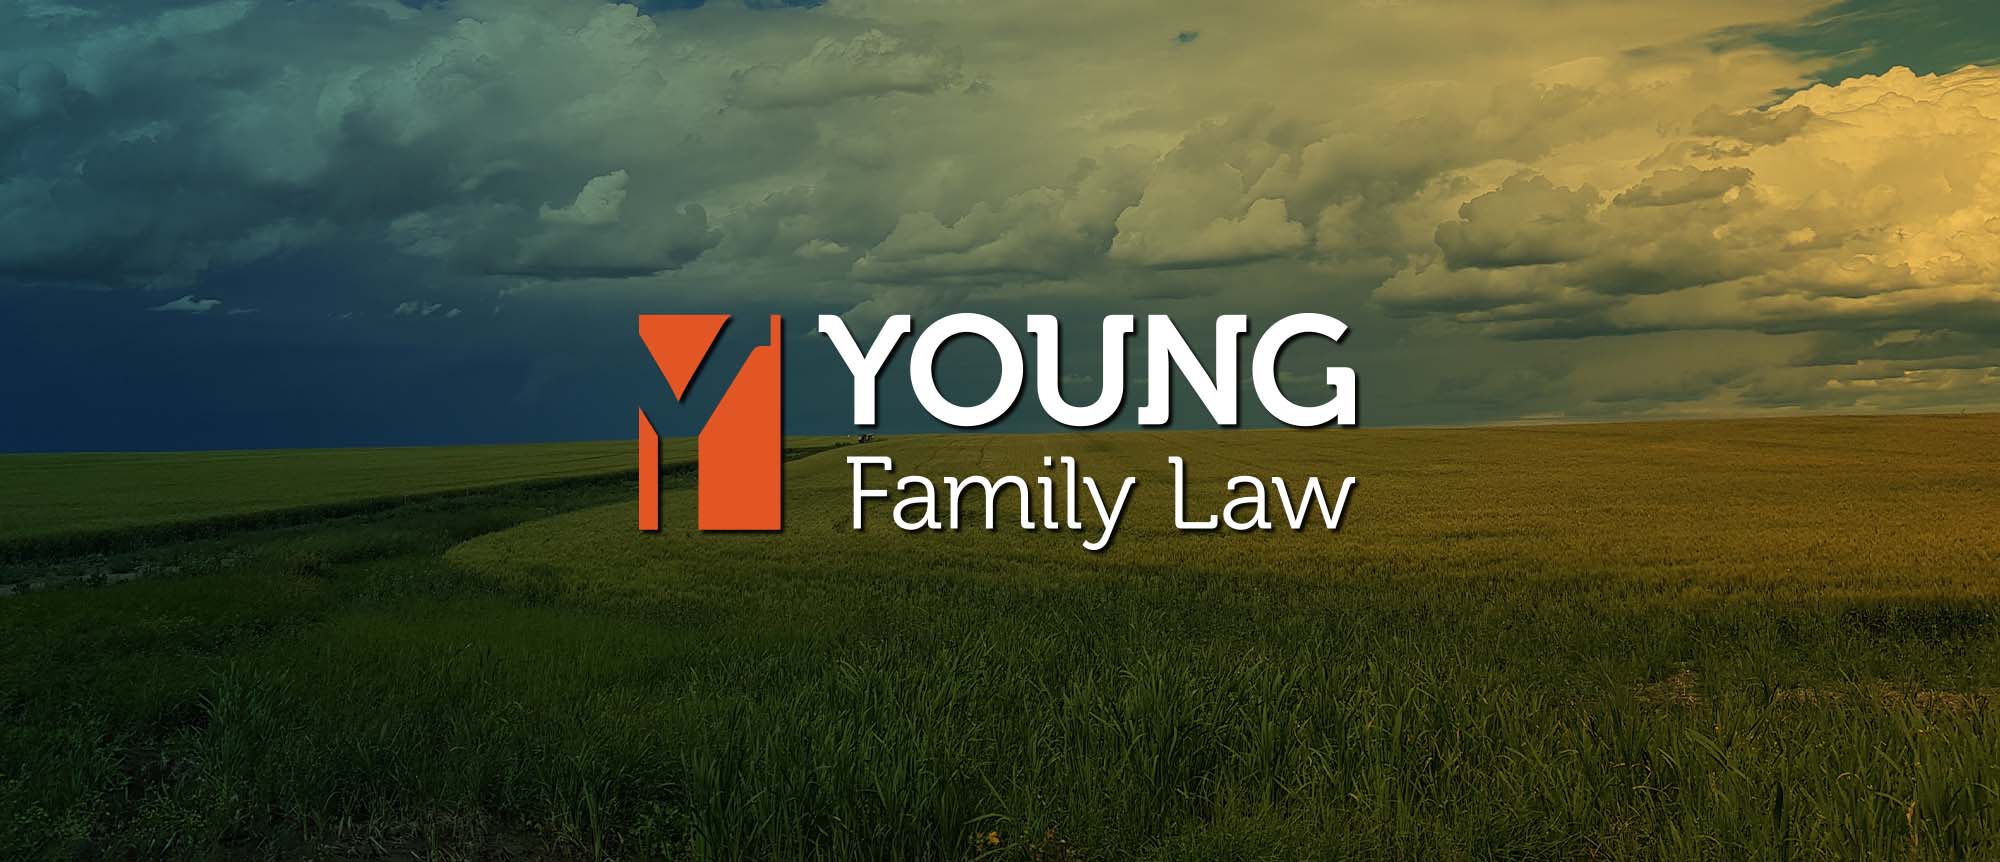 Young Family Law - homepage banner slider